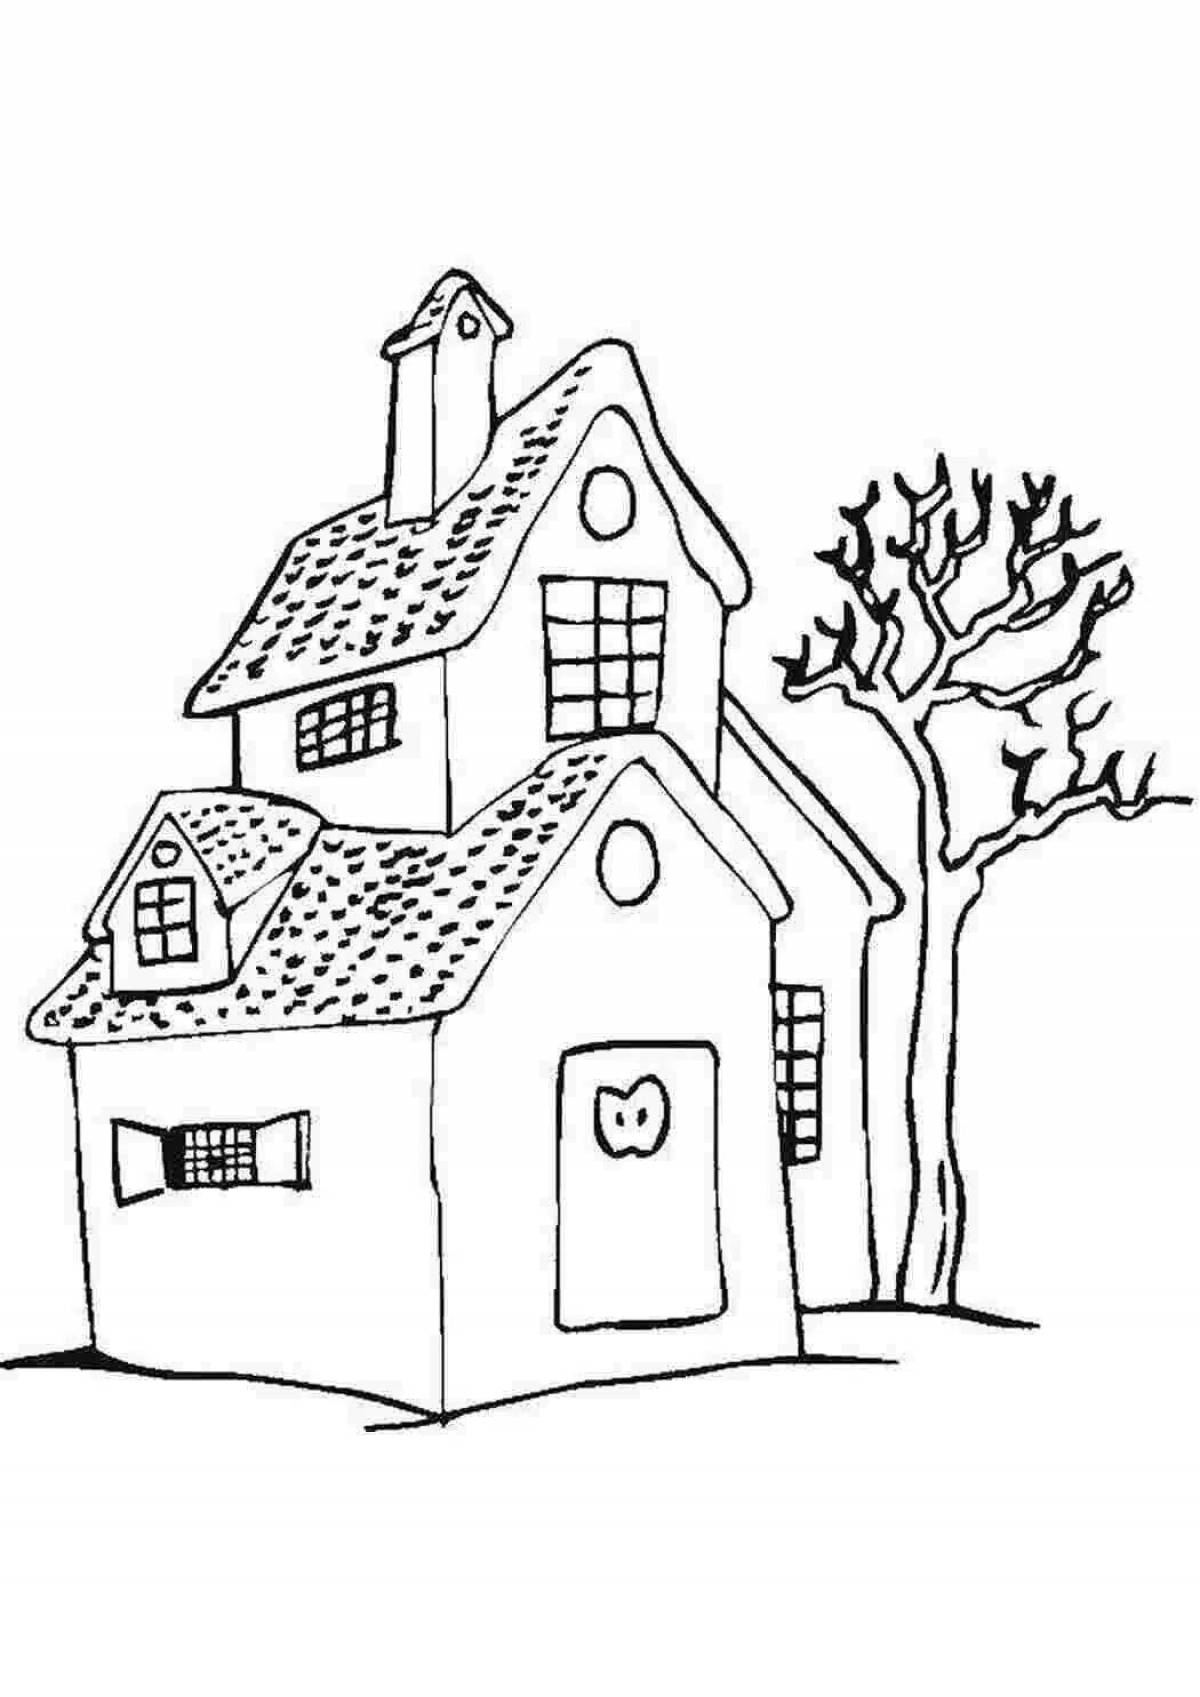 Coloring page adorable house for boys